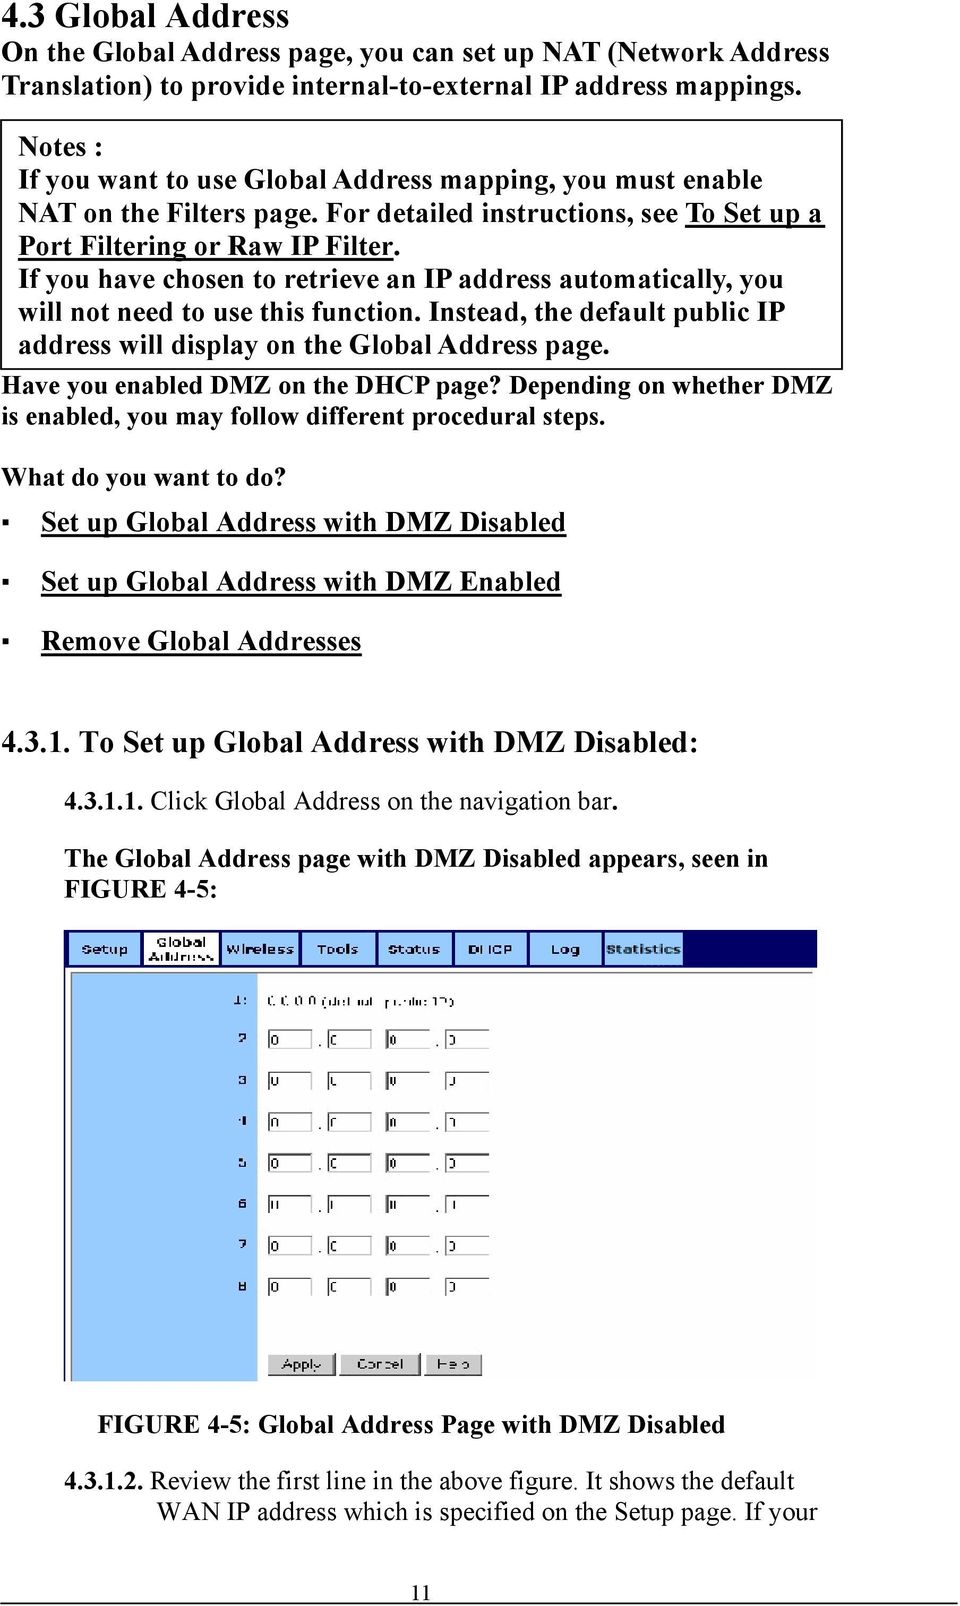 If you have chosen to retrieve an IP address automatically, you will not need to use this function. Instead, the default public IP address will display on the Global Address page.